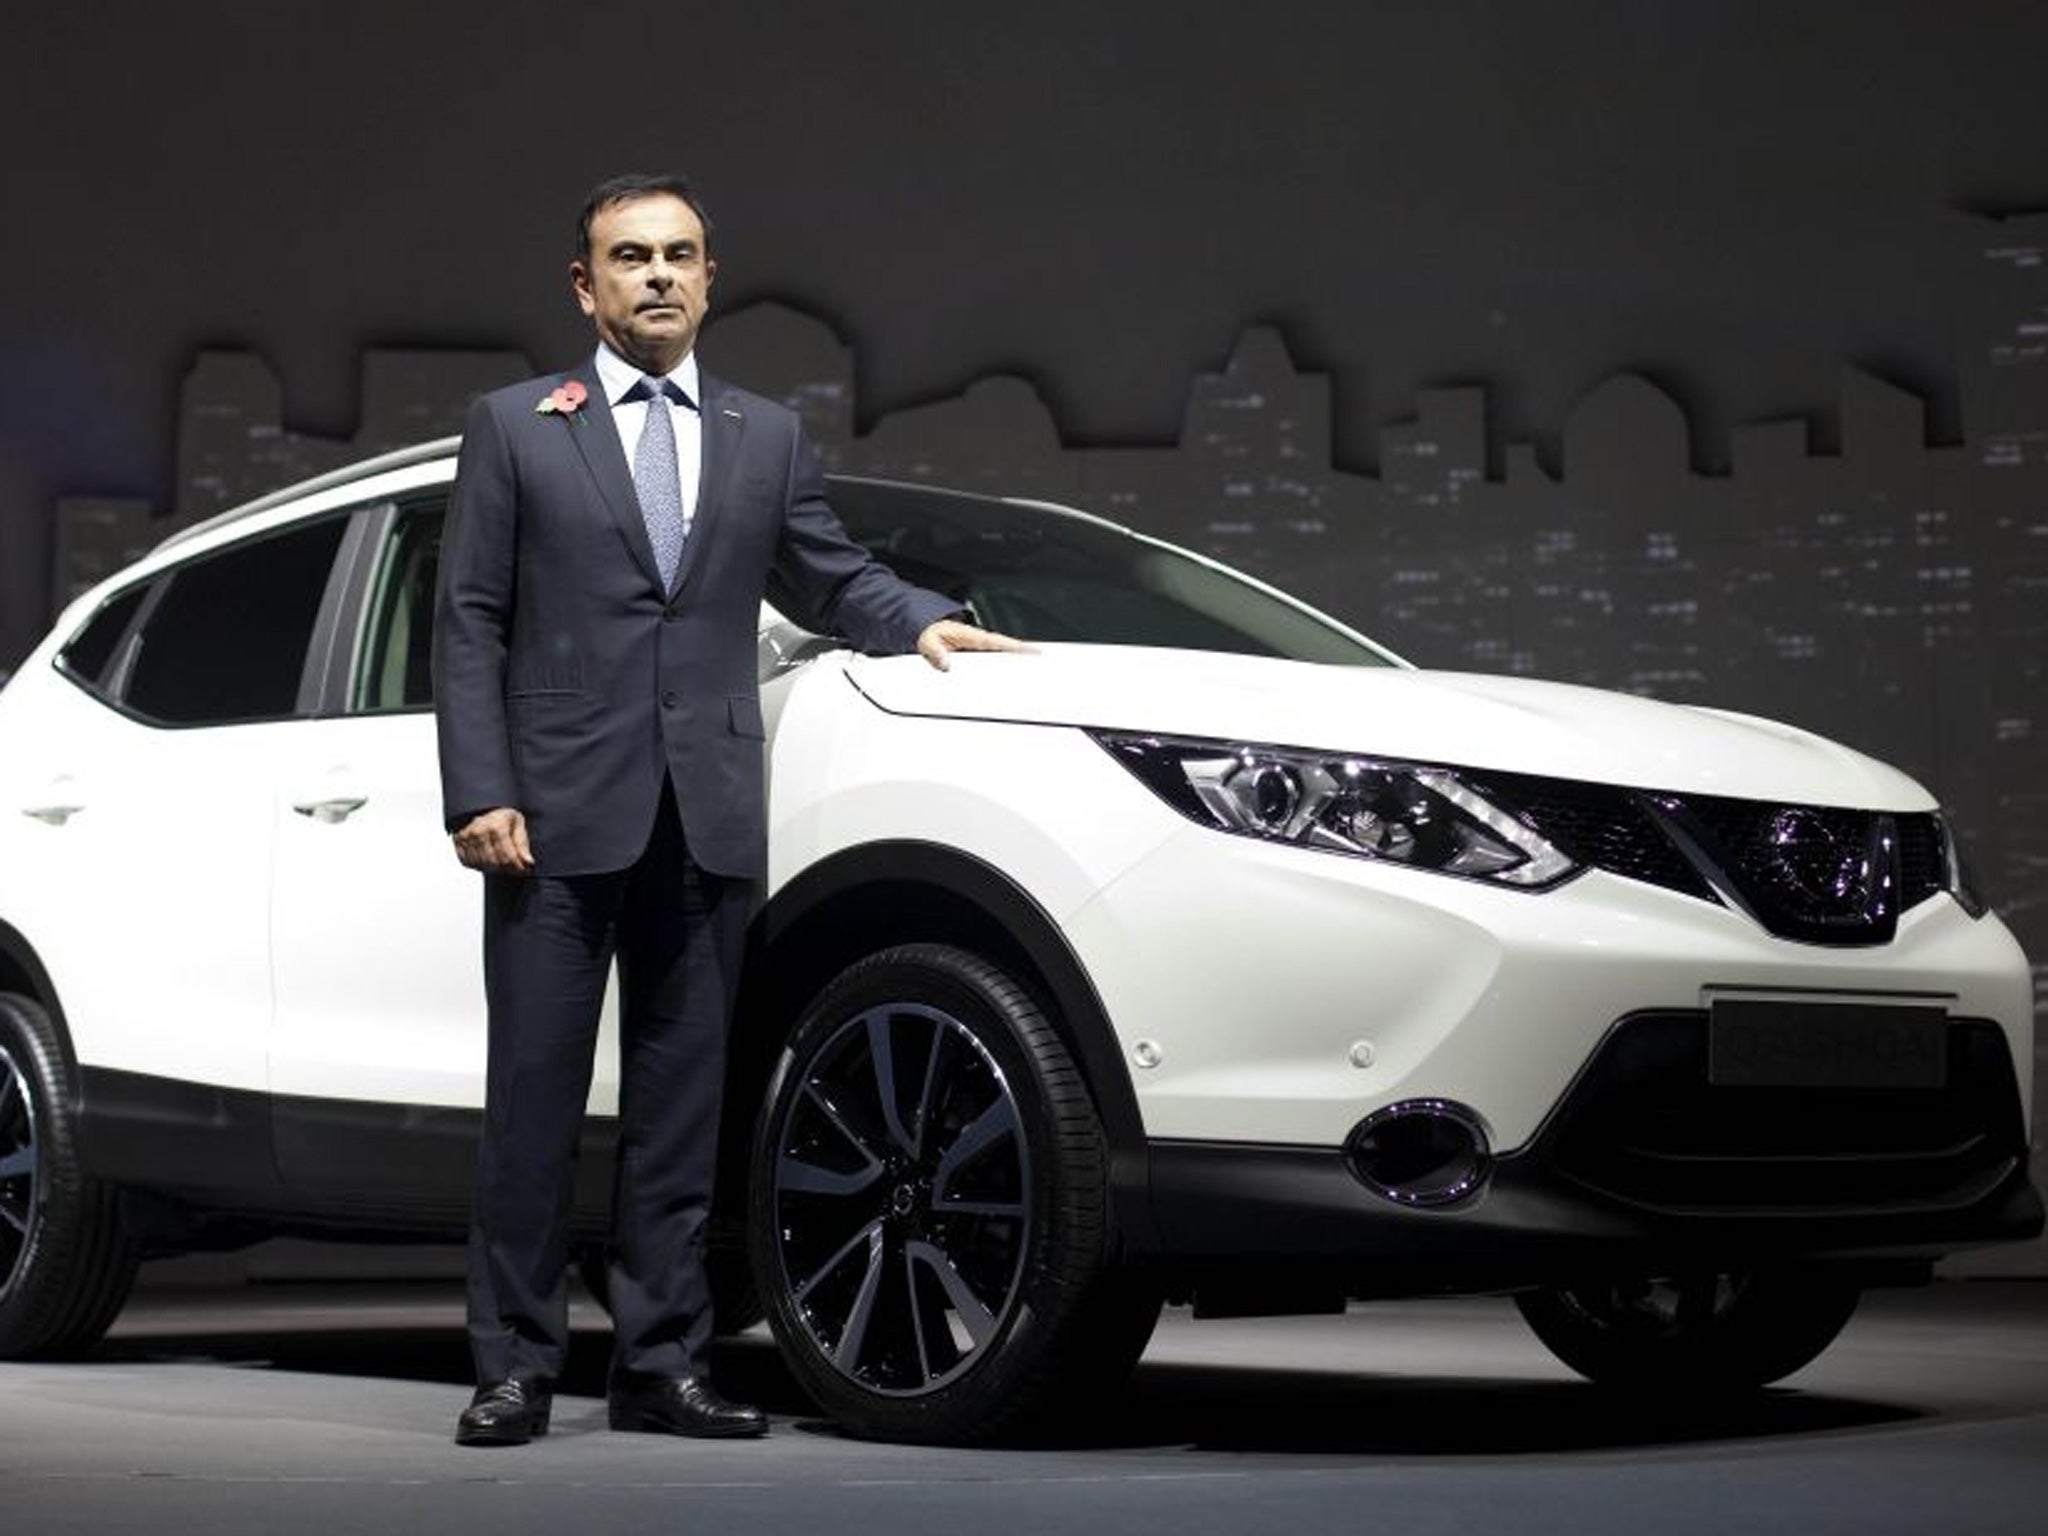 Carlos Ghosn, CEO of Nissan, at the launch of Nissan's new Qashqai model, who has warned the car maker would "reconsider" its future in the UK if it left the European Union